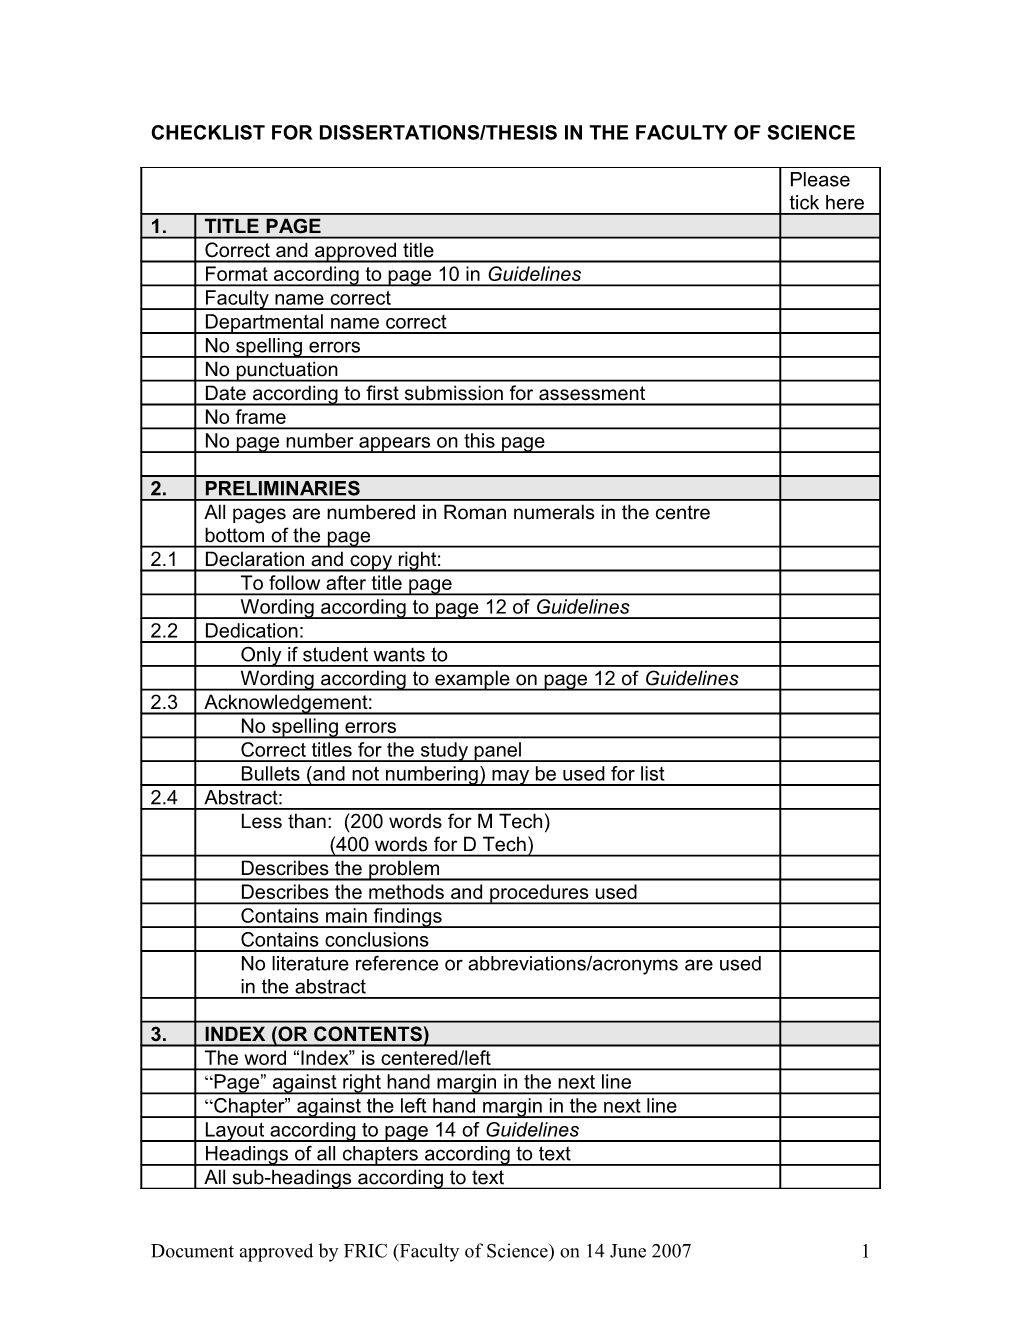 Checklist for Dissertations/Thesis in the Faculty of Science